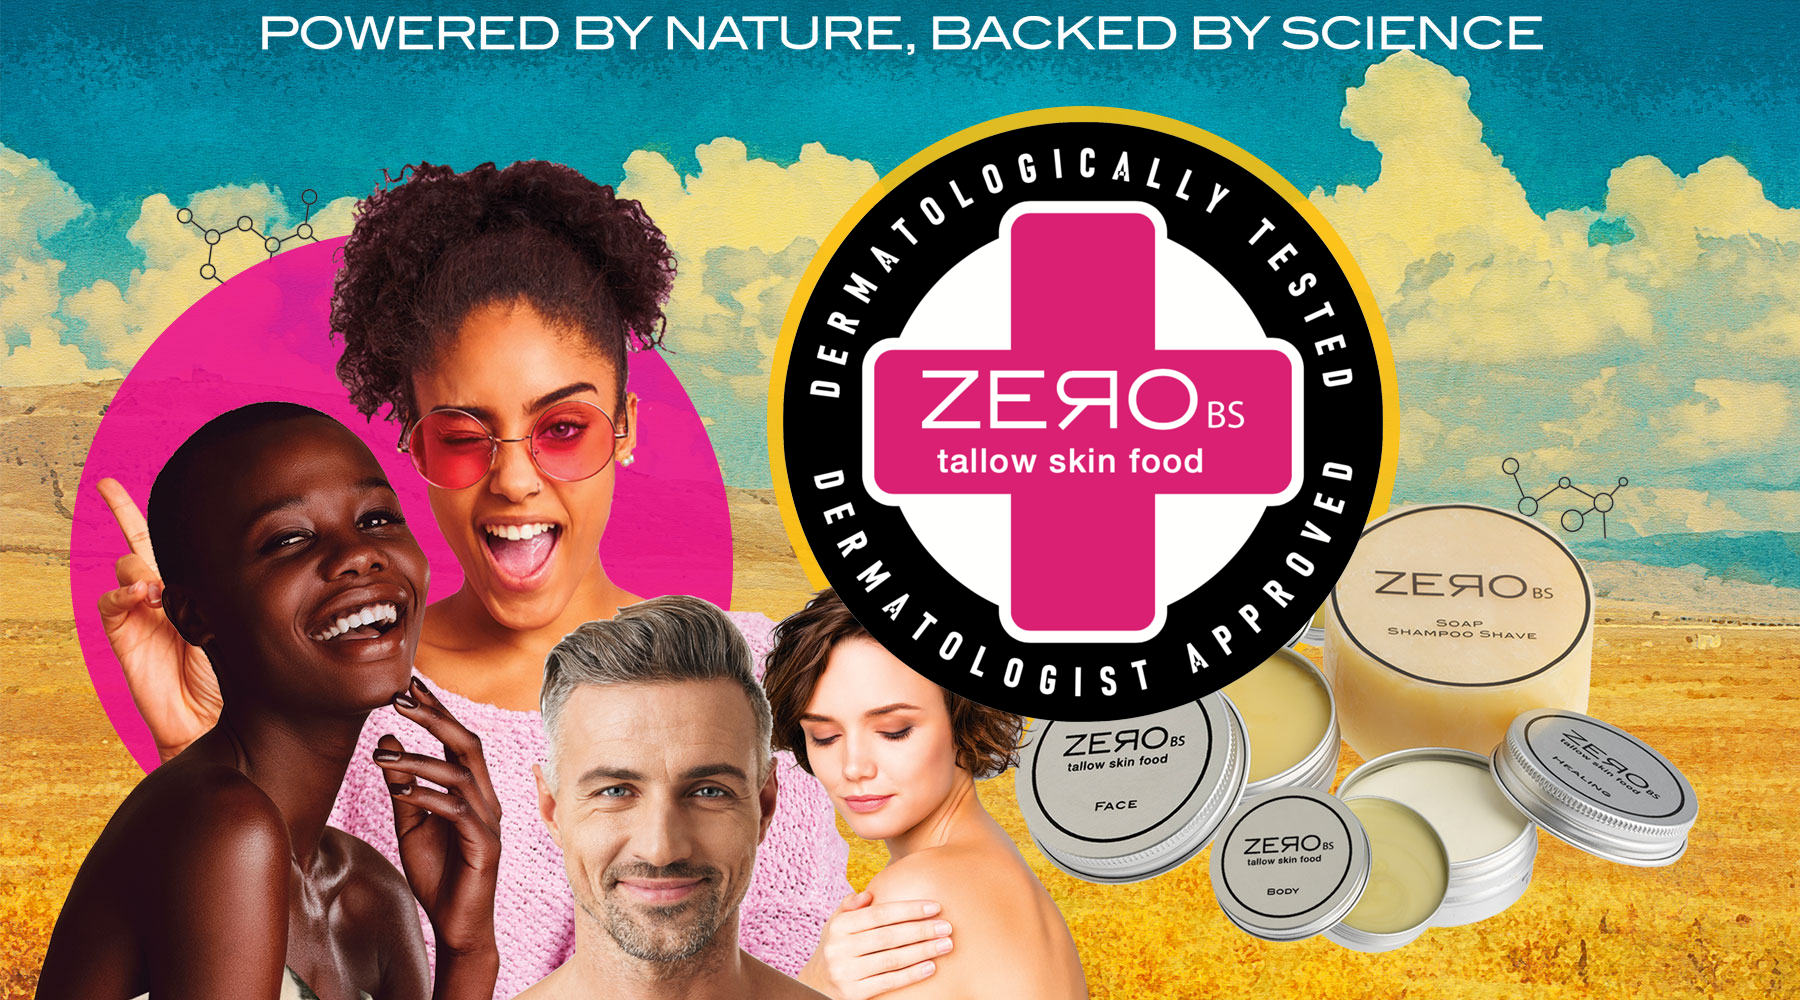 Zero BS: Now Dermatologically Tested and Dermatologist Approved